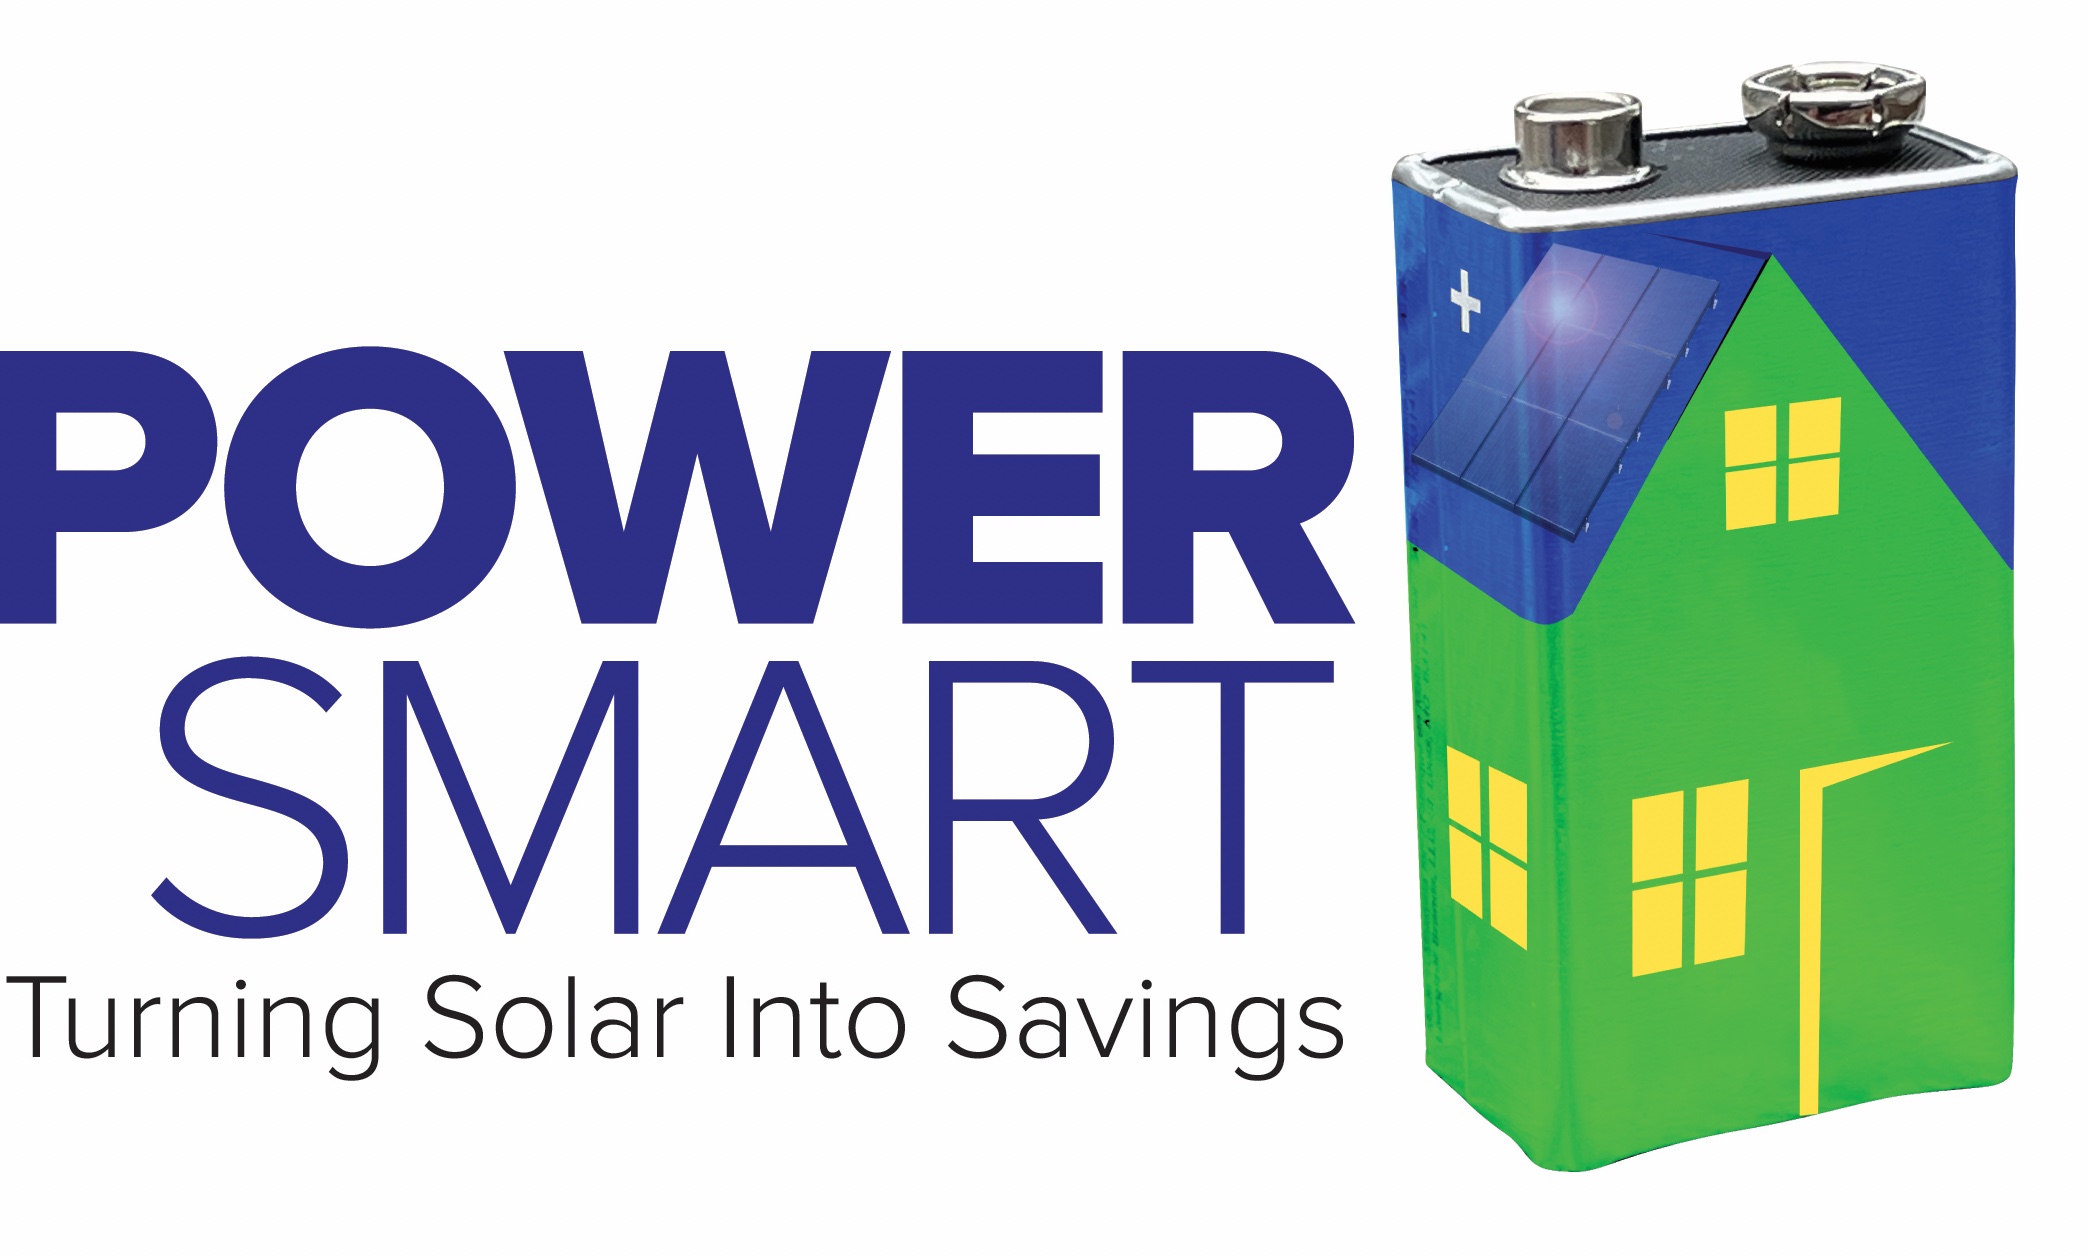 Energy Storage Solutions Campaign To Continue With Virtual PowerSmart Info Session